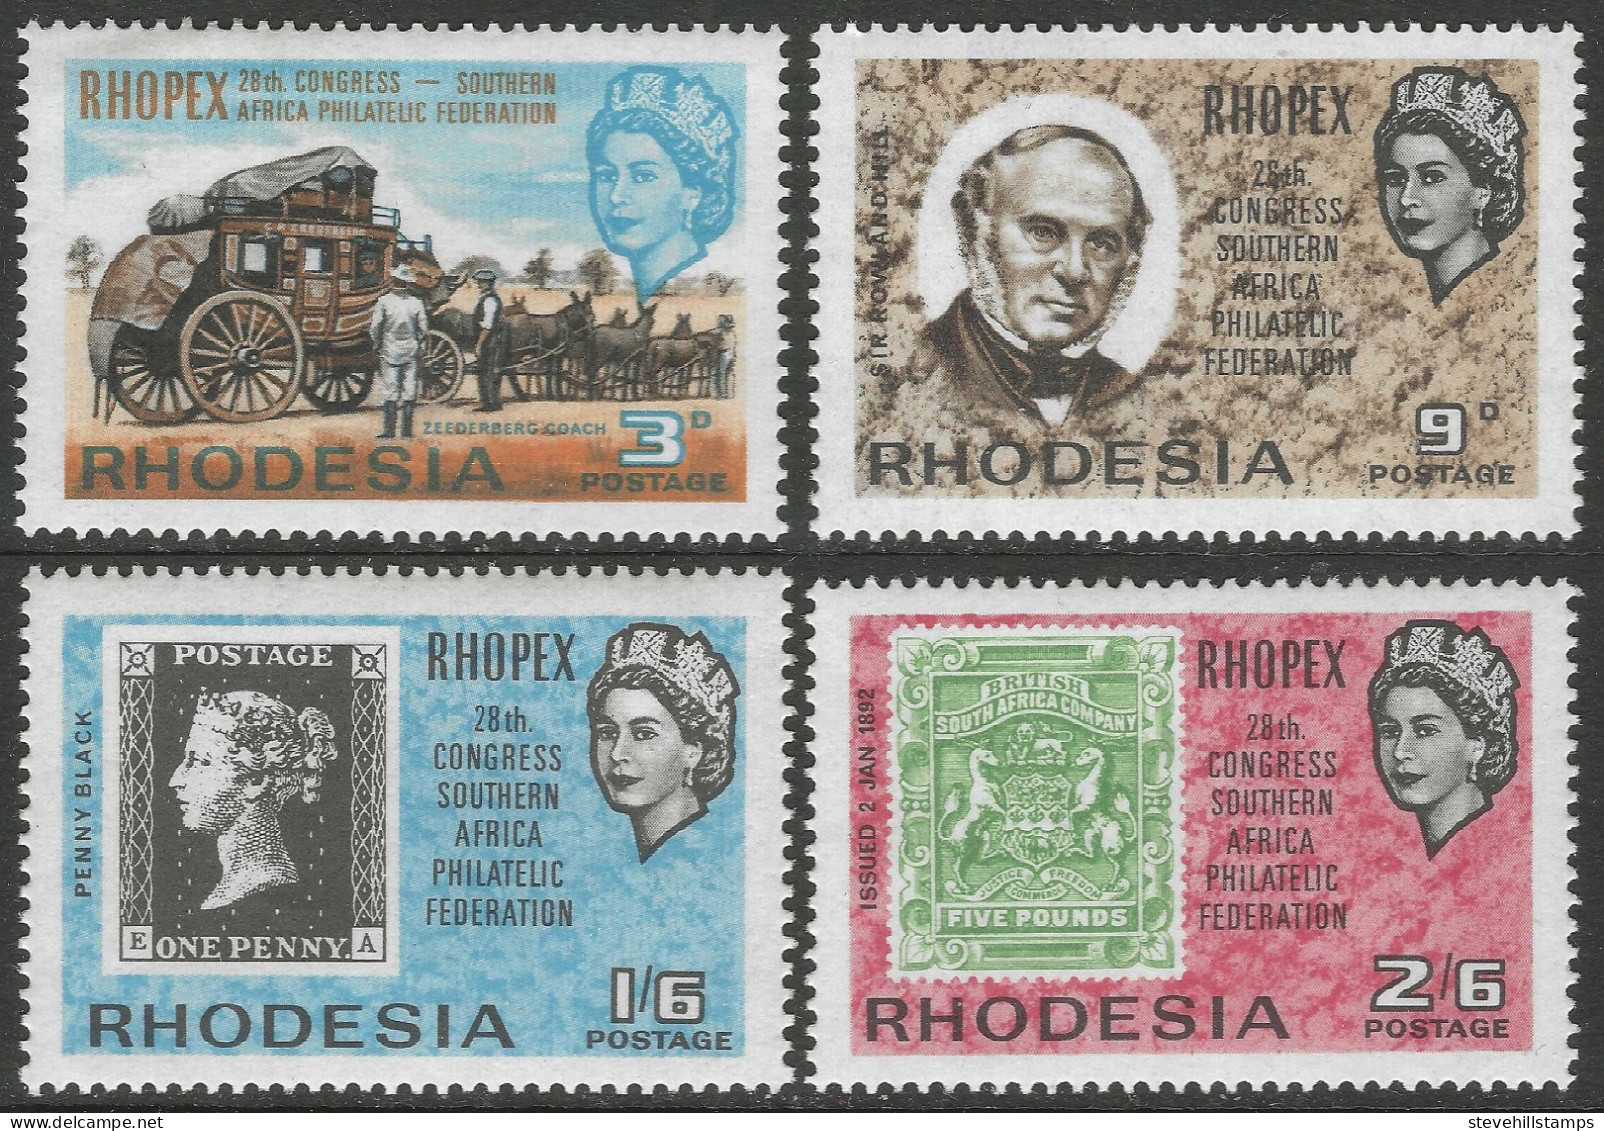 Rhodesia. 1966 28th Congress Of Southern Africa Philatelic Federation (RHOPEX). MH Complete Set. SG 388-391 - Rhodesien (1964-1980)